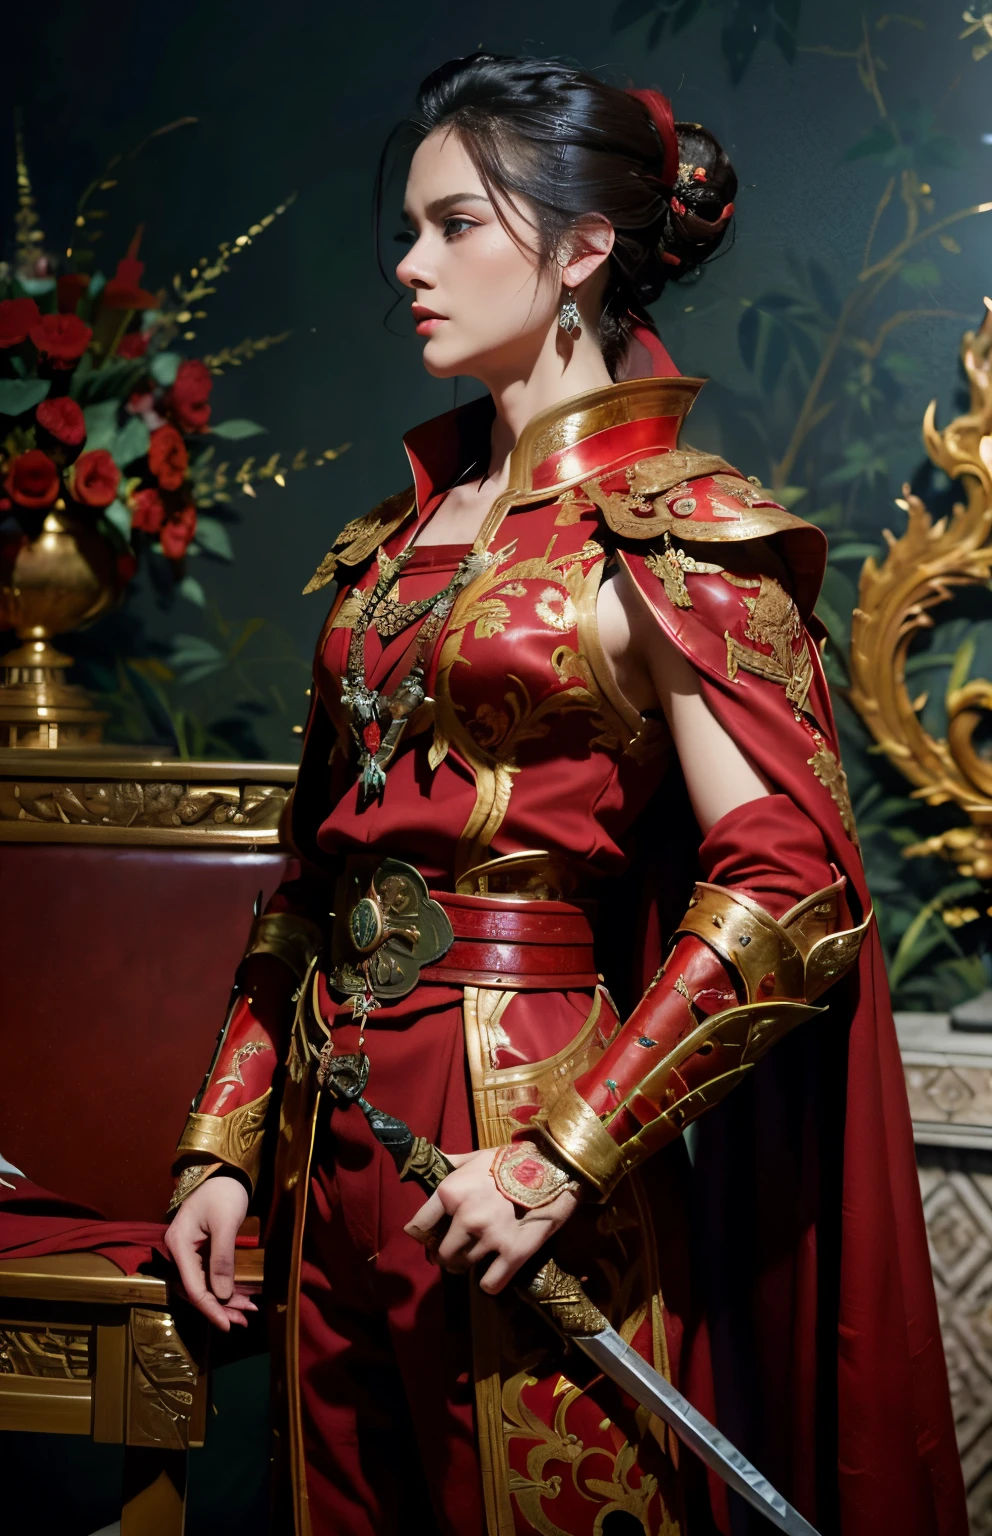 Looks serious.., Lip press., (Updo Red:1.2), (Red Steel Armor:1.1) And a robe... (capes:1.2) Royal style family (embroidery:0.5) With a sword..., skinny (Gorket Luckcart Poldron :1.3), Falcon symbol on armor, (masterpiece:1.2) (illustration:1.1) (bestquality:1.2) (Detailed) (intricate) (10) (HDR) (wallpaper) (Cinematic lighting) (crisp focus), Linewichit Style